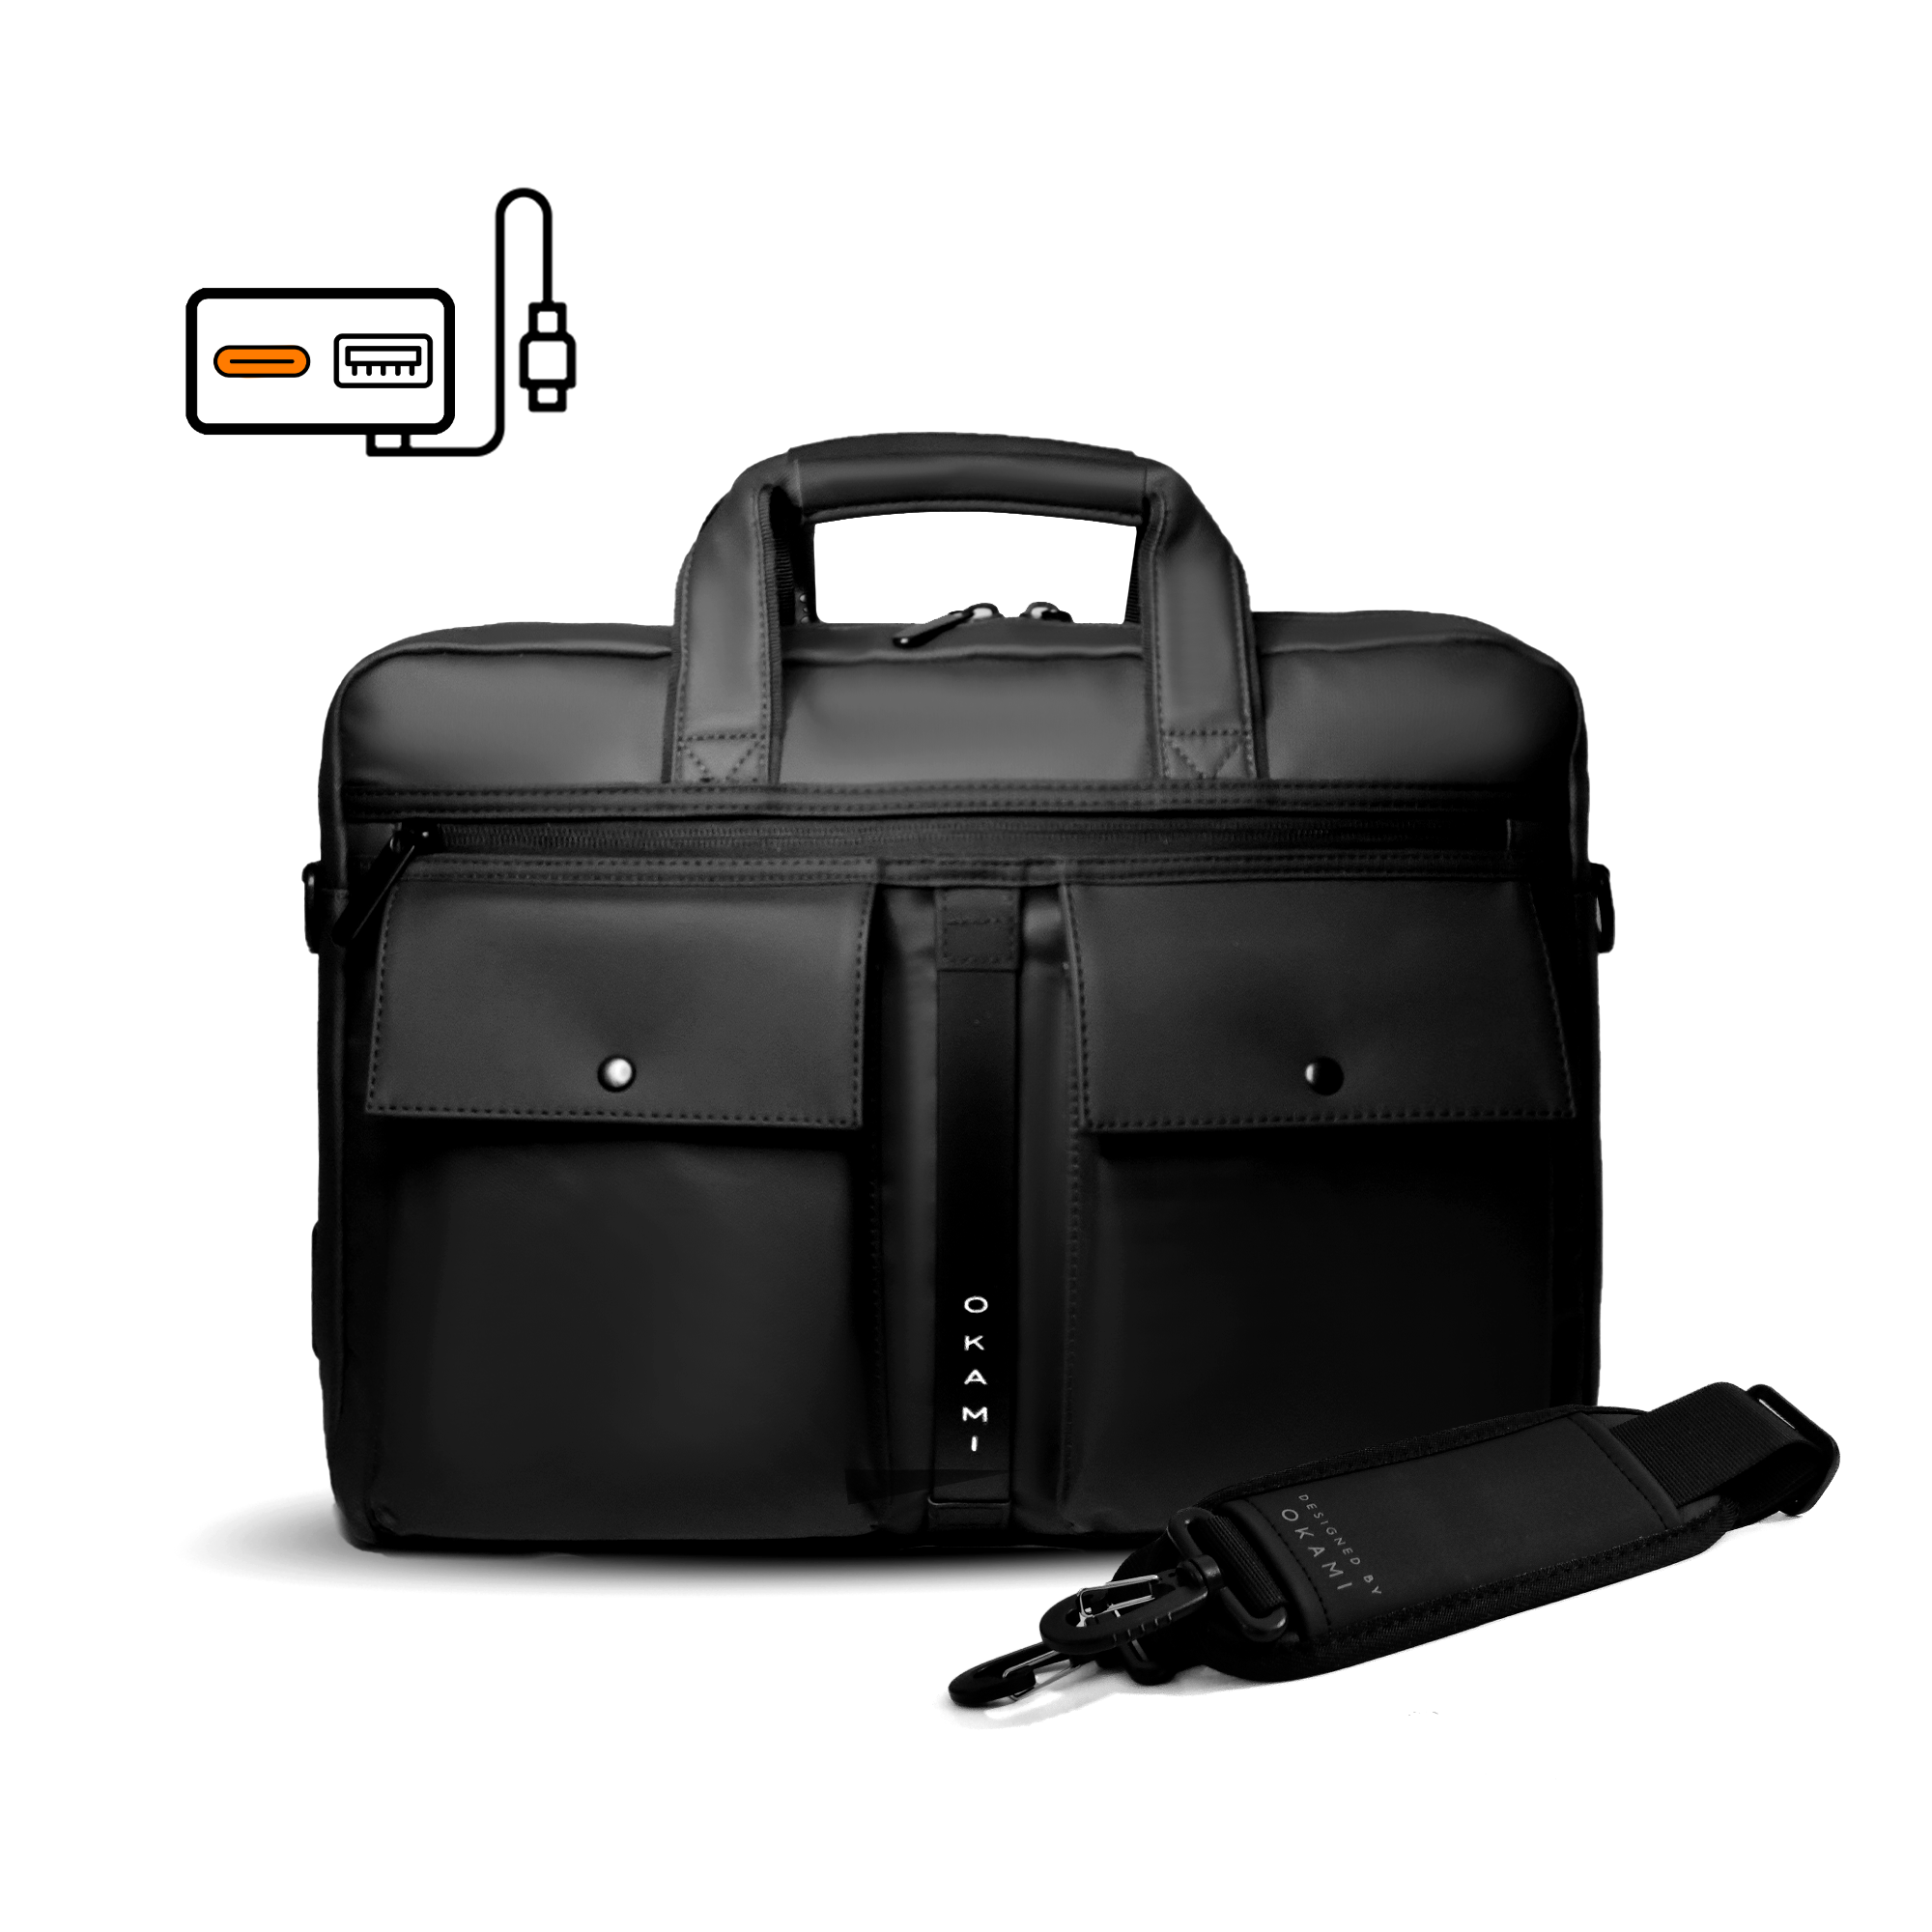 Zenpack Cargo Laptop Messenger Bag X Briefcase - DUAL USB with type-C port for Fast-Charging (Black)